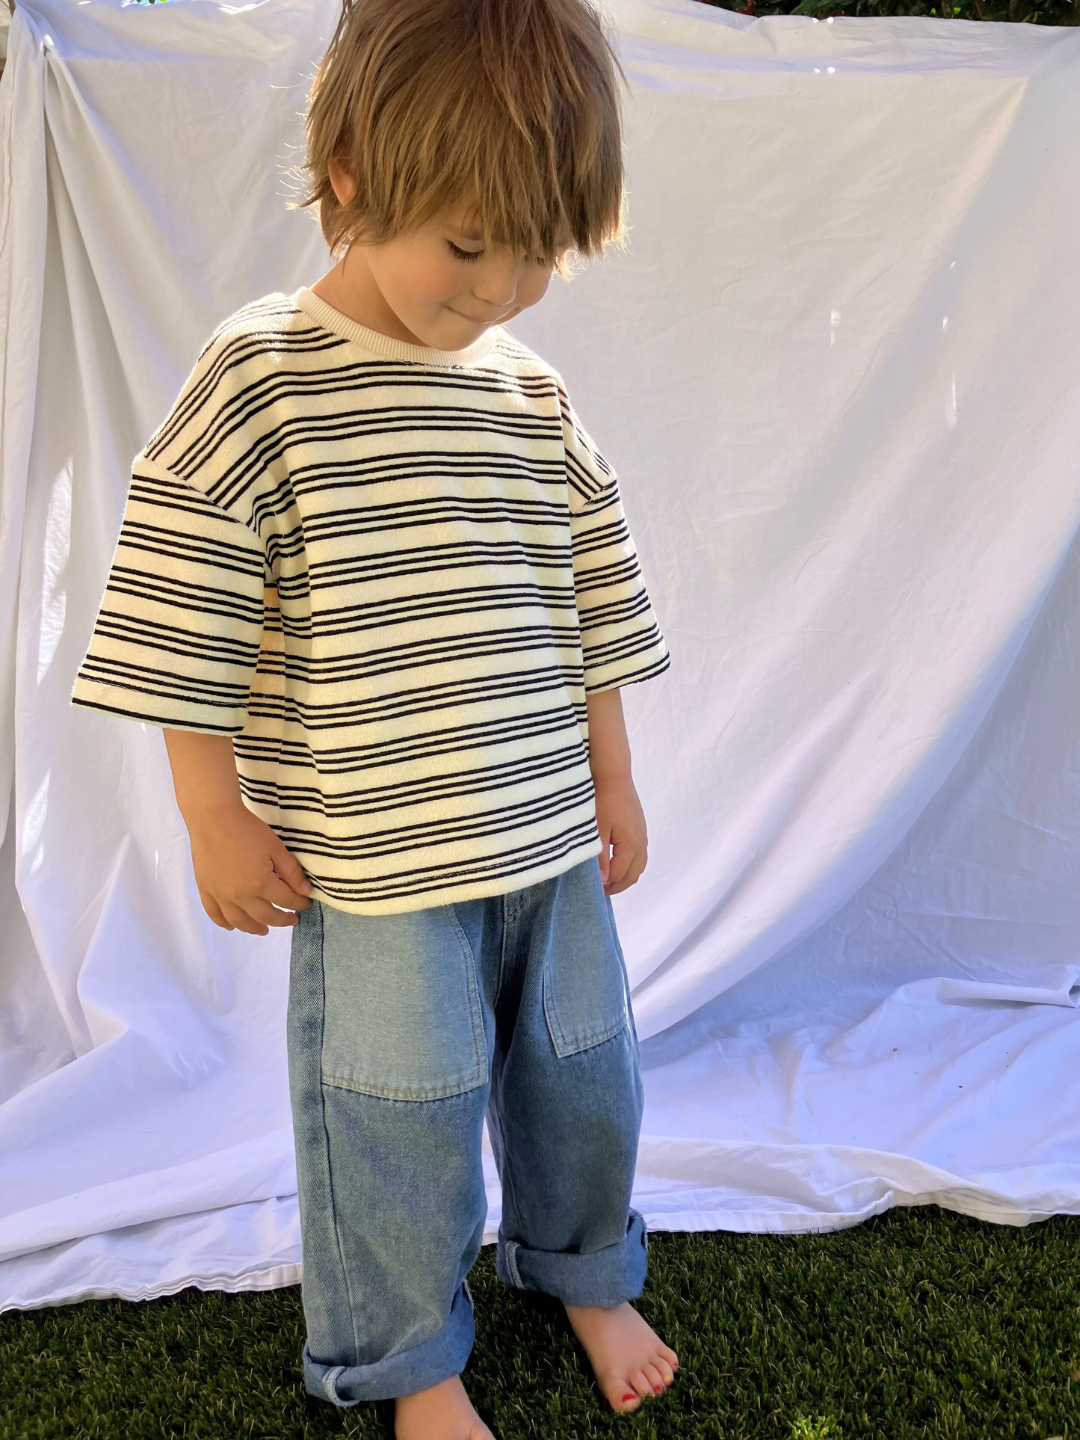 A child wearing the Double Trouble baggy jeans in medium-blue denim with two large patch pockets of lighter denim. He wears an oversized striped t-shirt in cream, with black stripes, and stands in front of a white sheet, standing on grass.